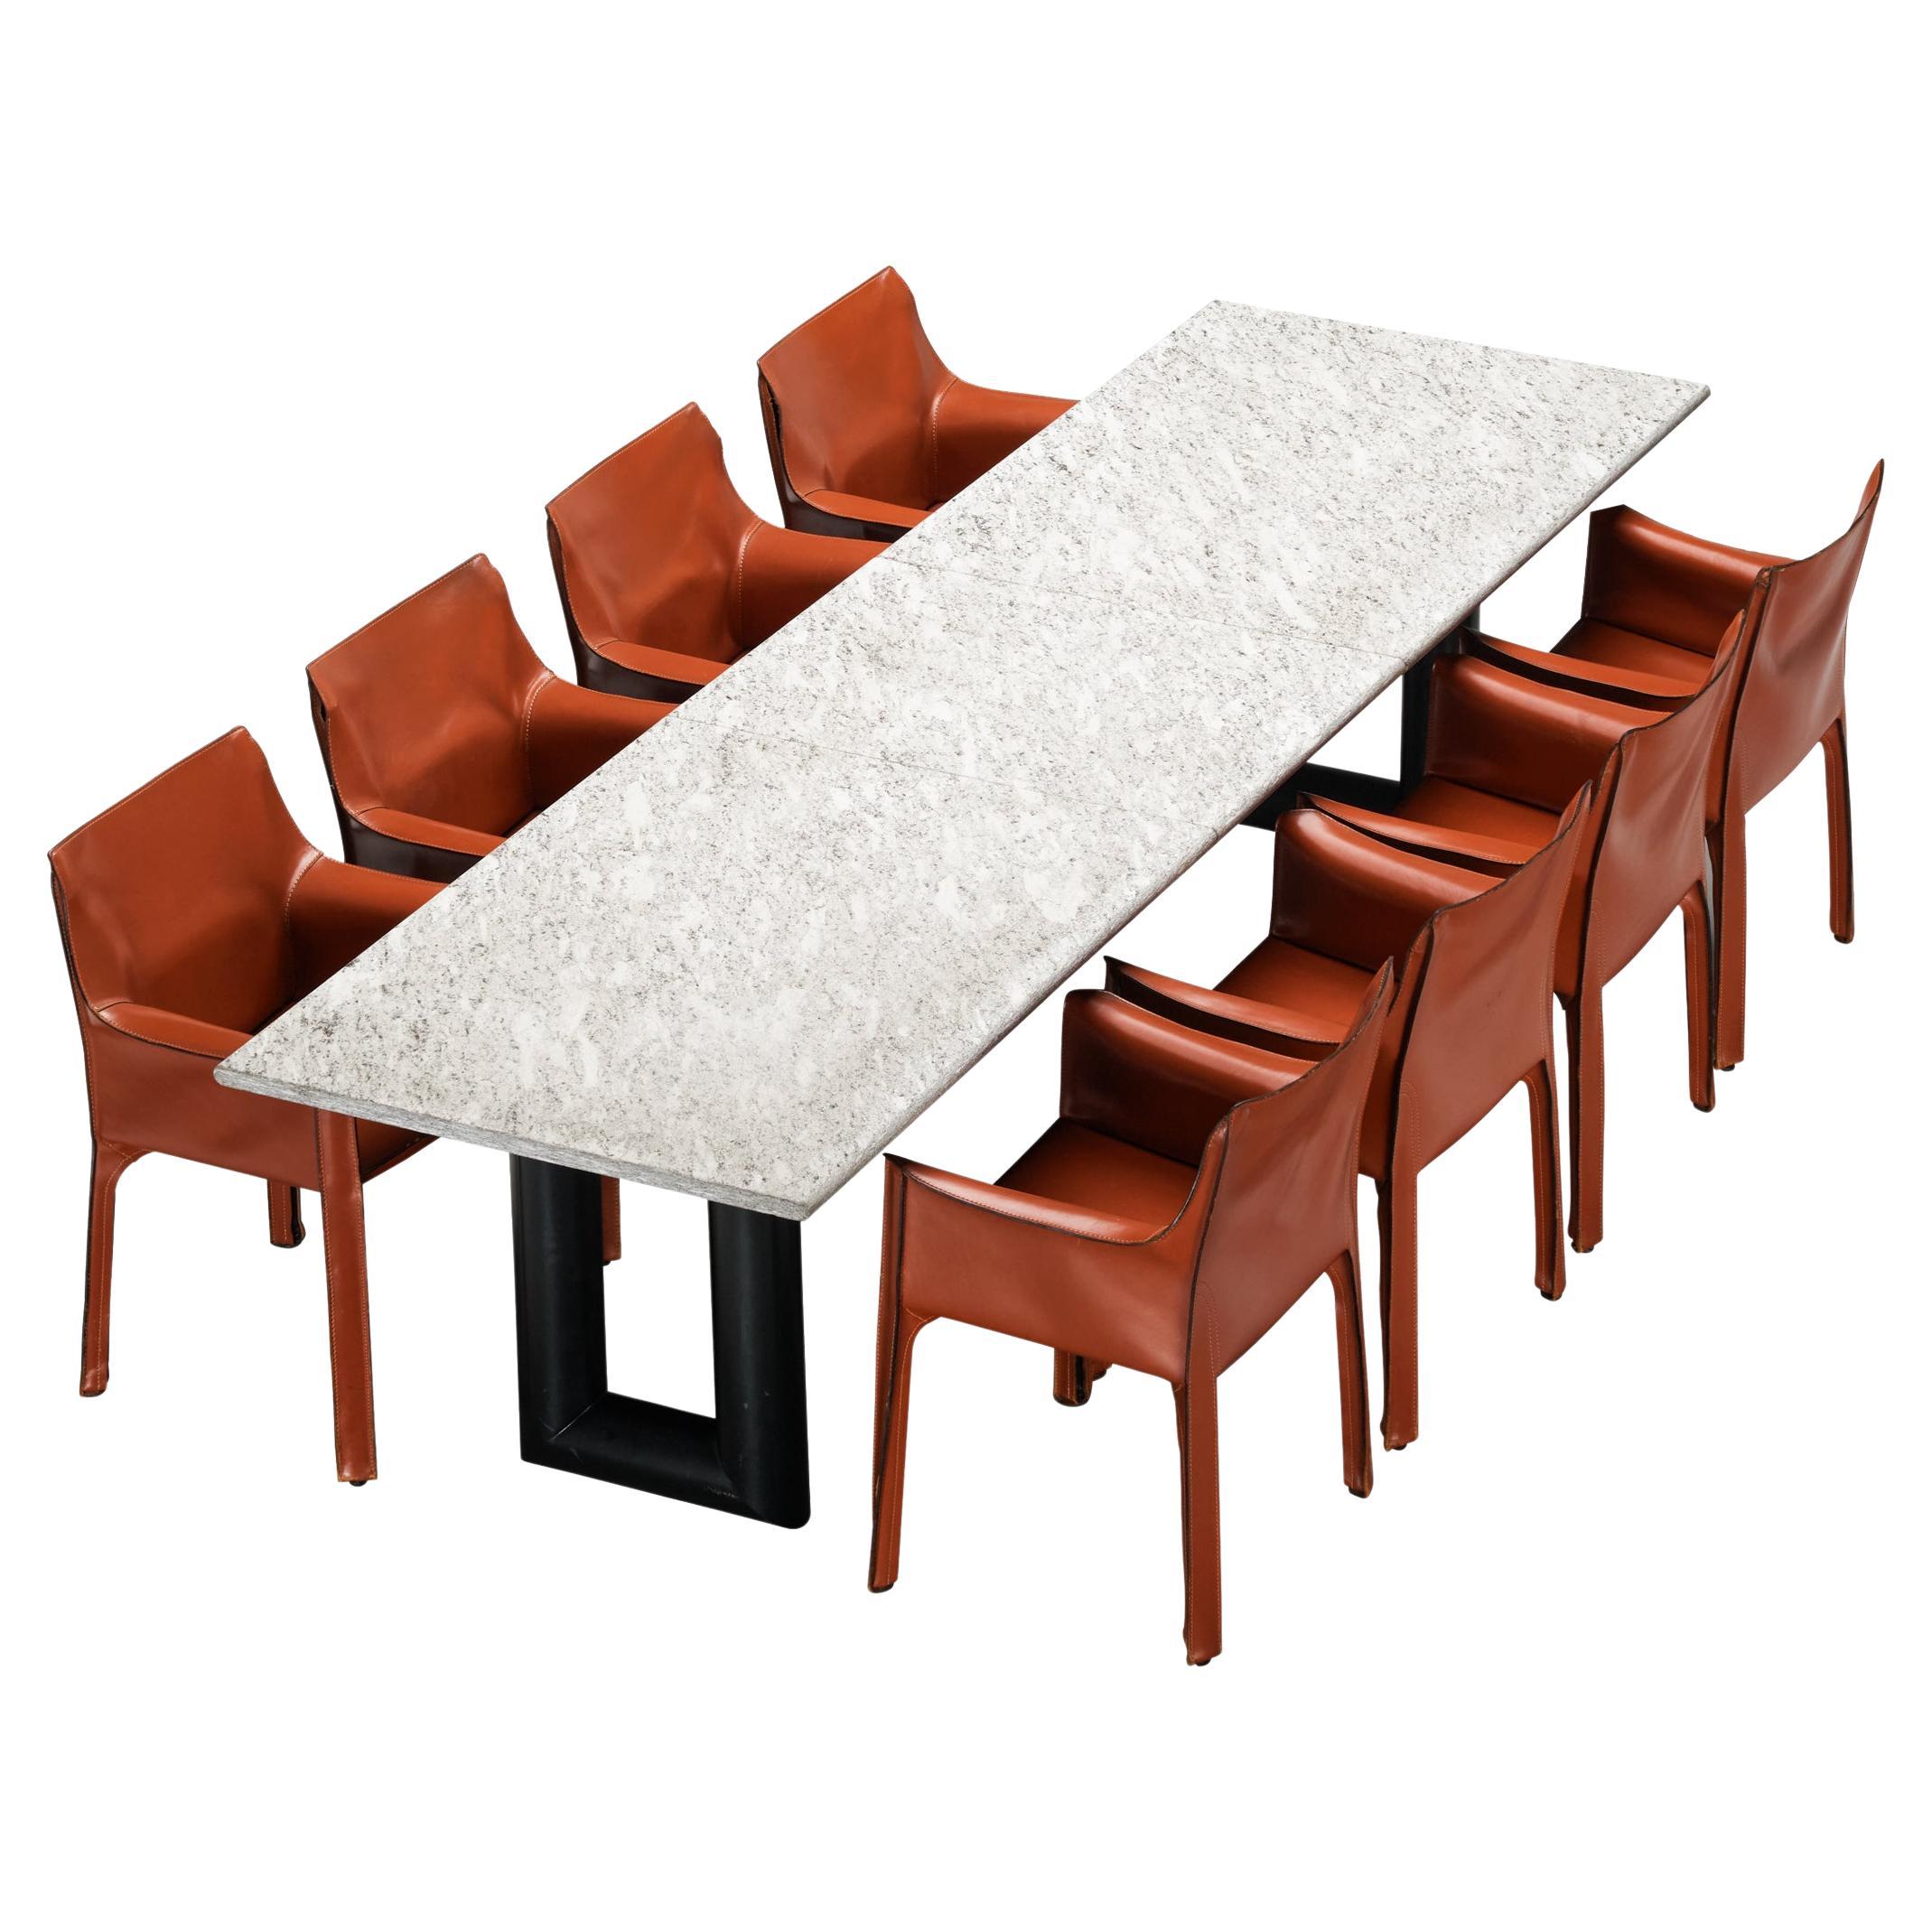 Dining Room Set With Mario Botta Dining Table and Mario Bellini Chairs 